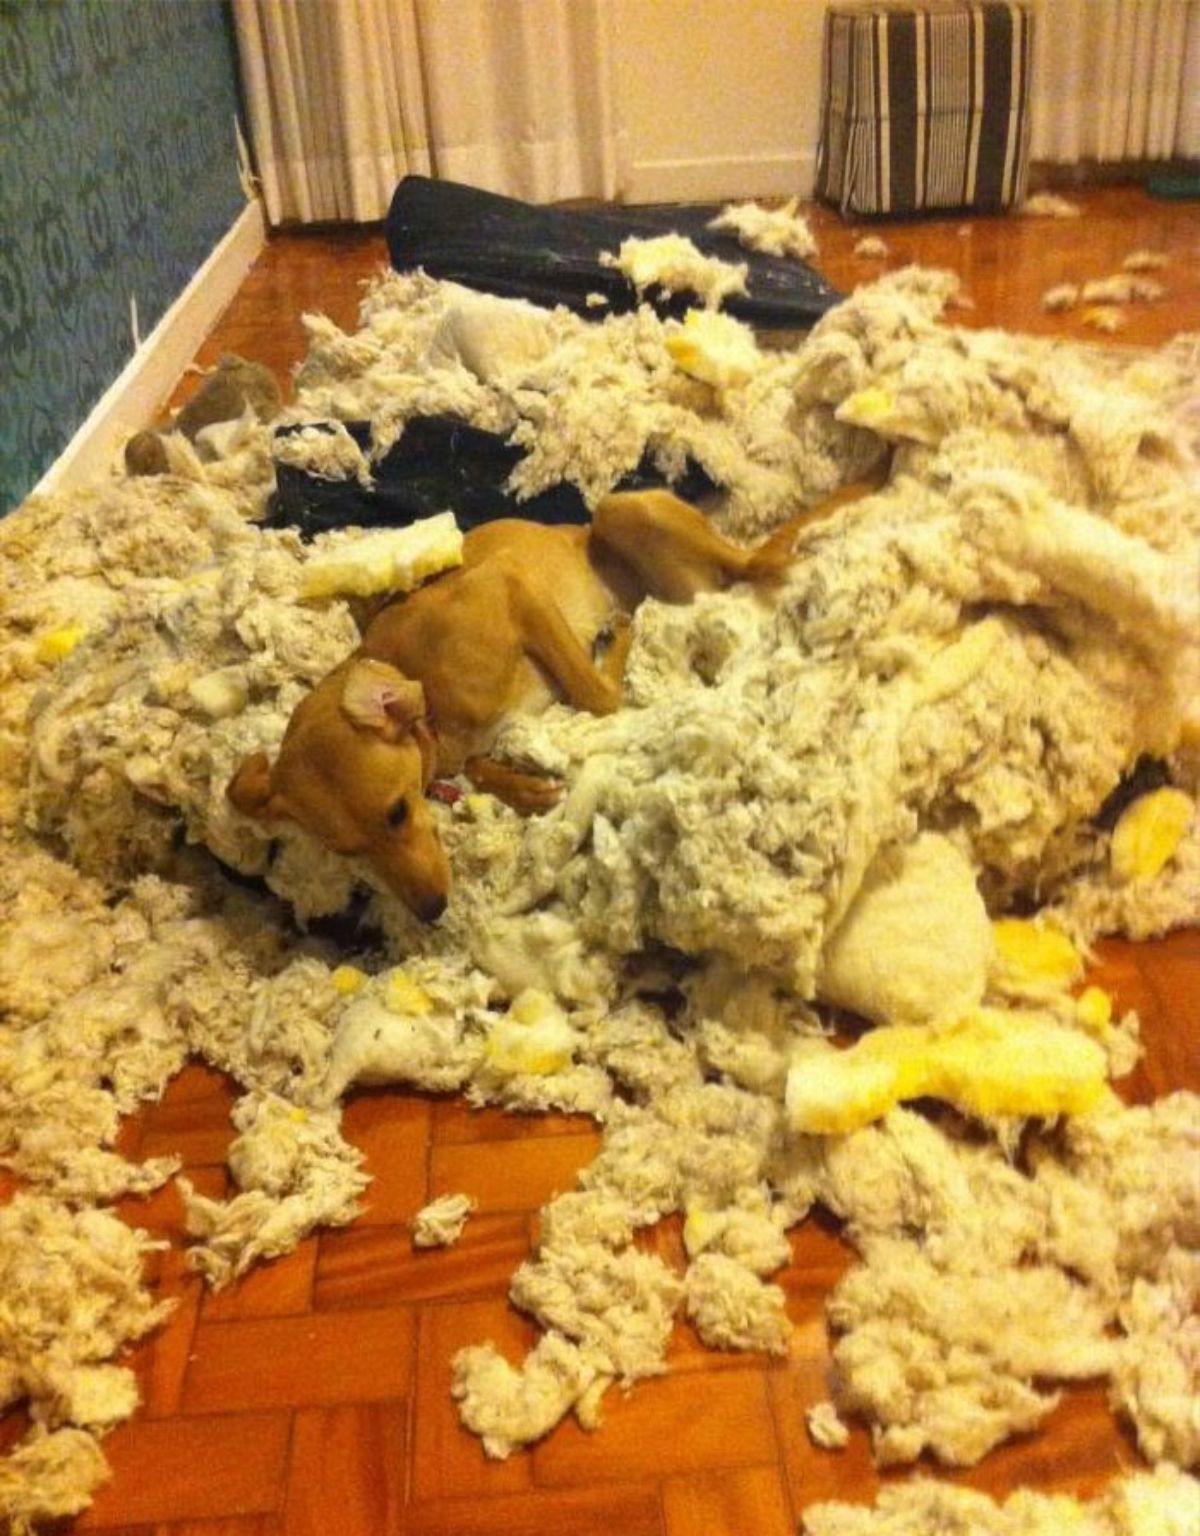 brown dog laying among a huge pile of yellow stuffing from a futon